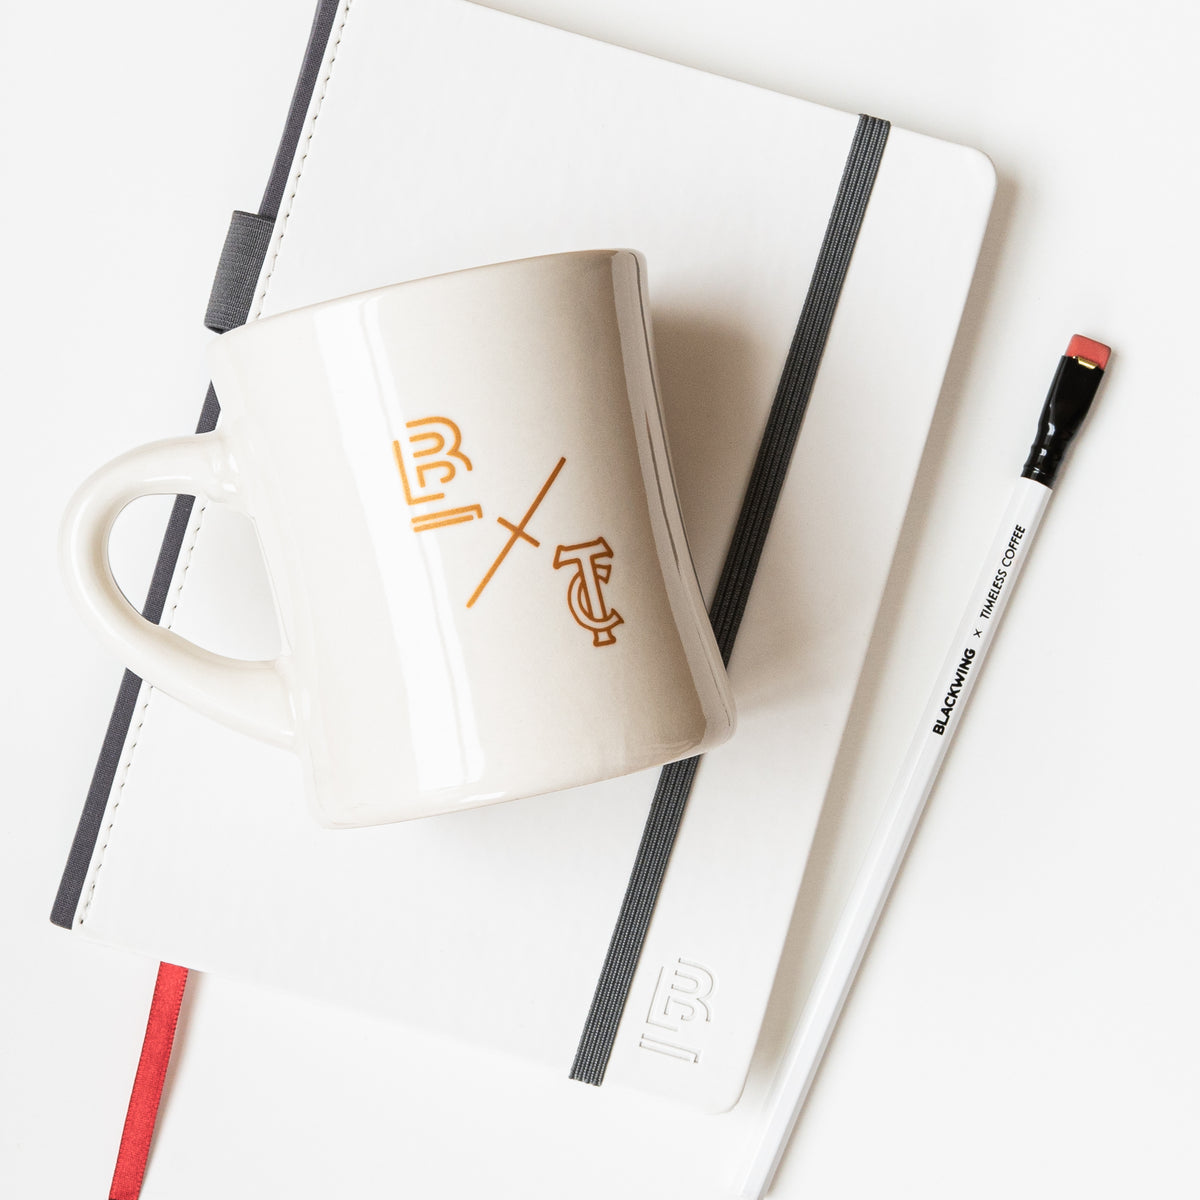 A Blackwing x Timeless Coffee Bundle with a notebook beside it.